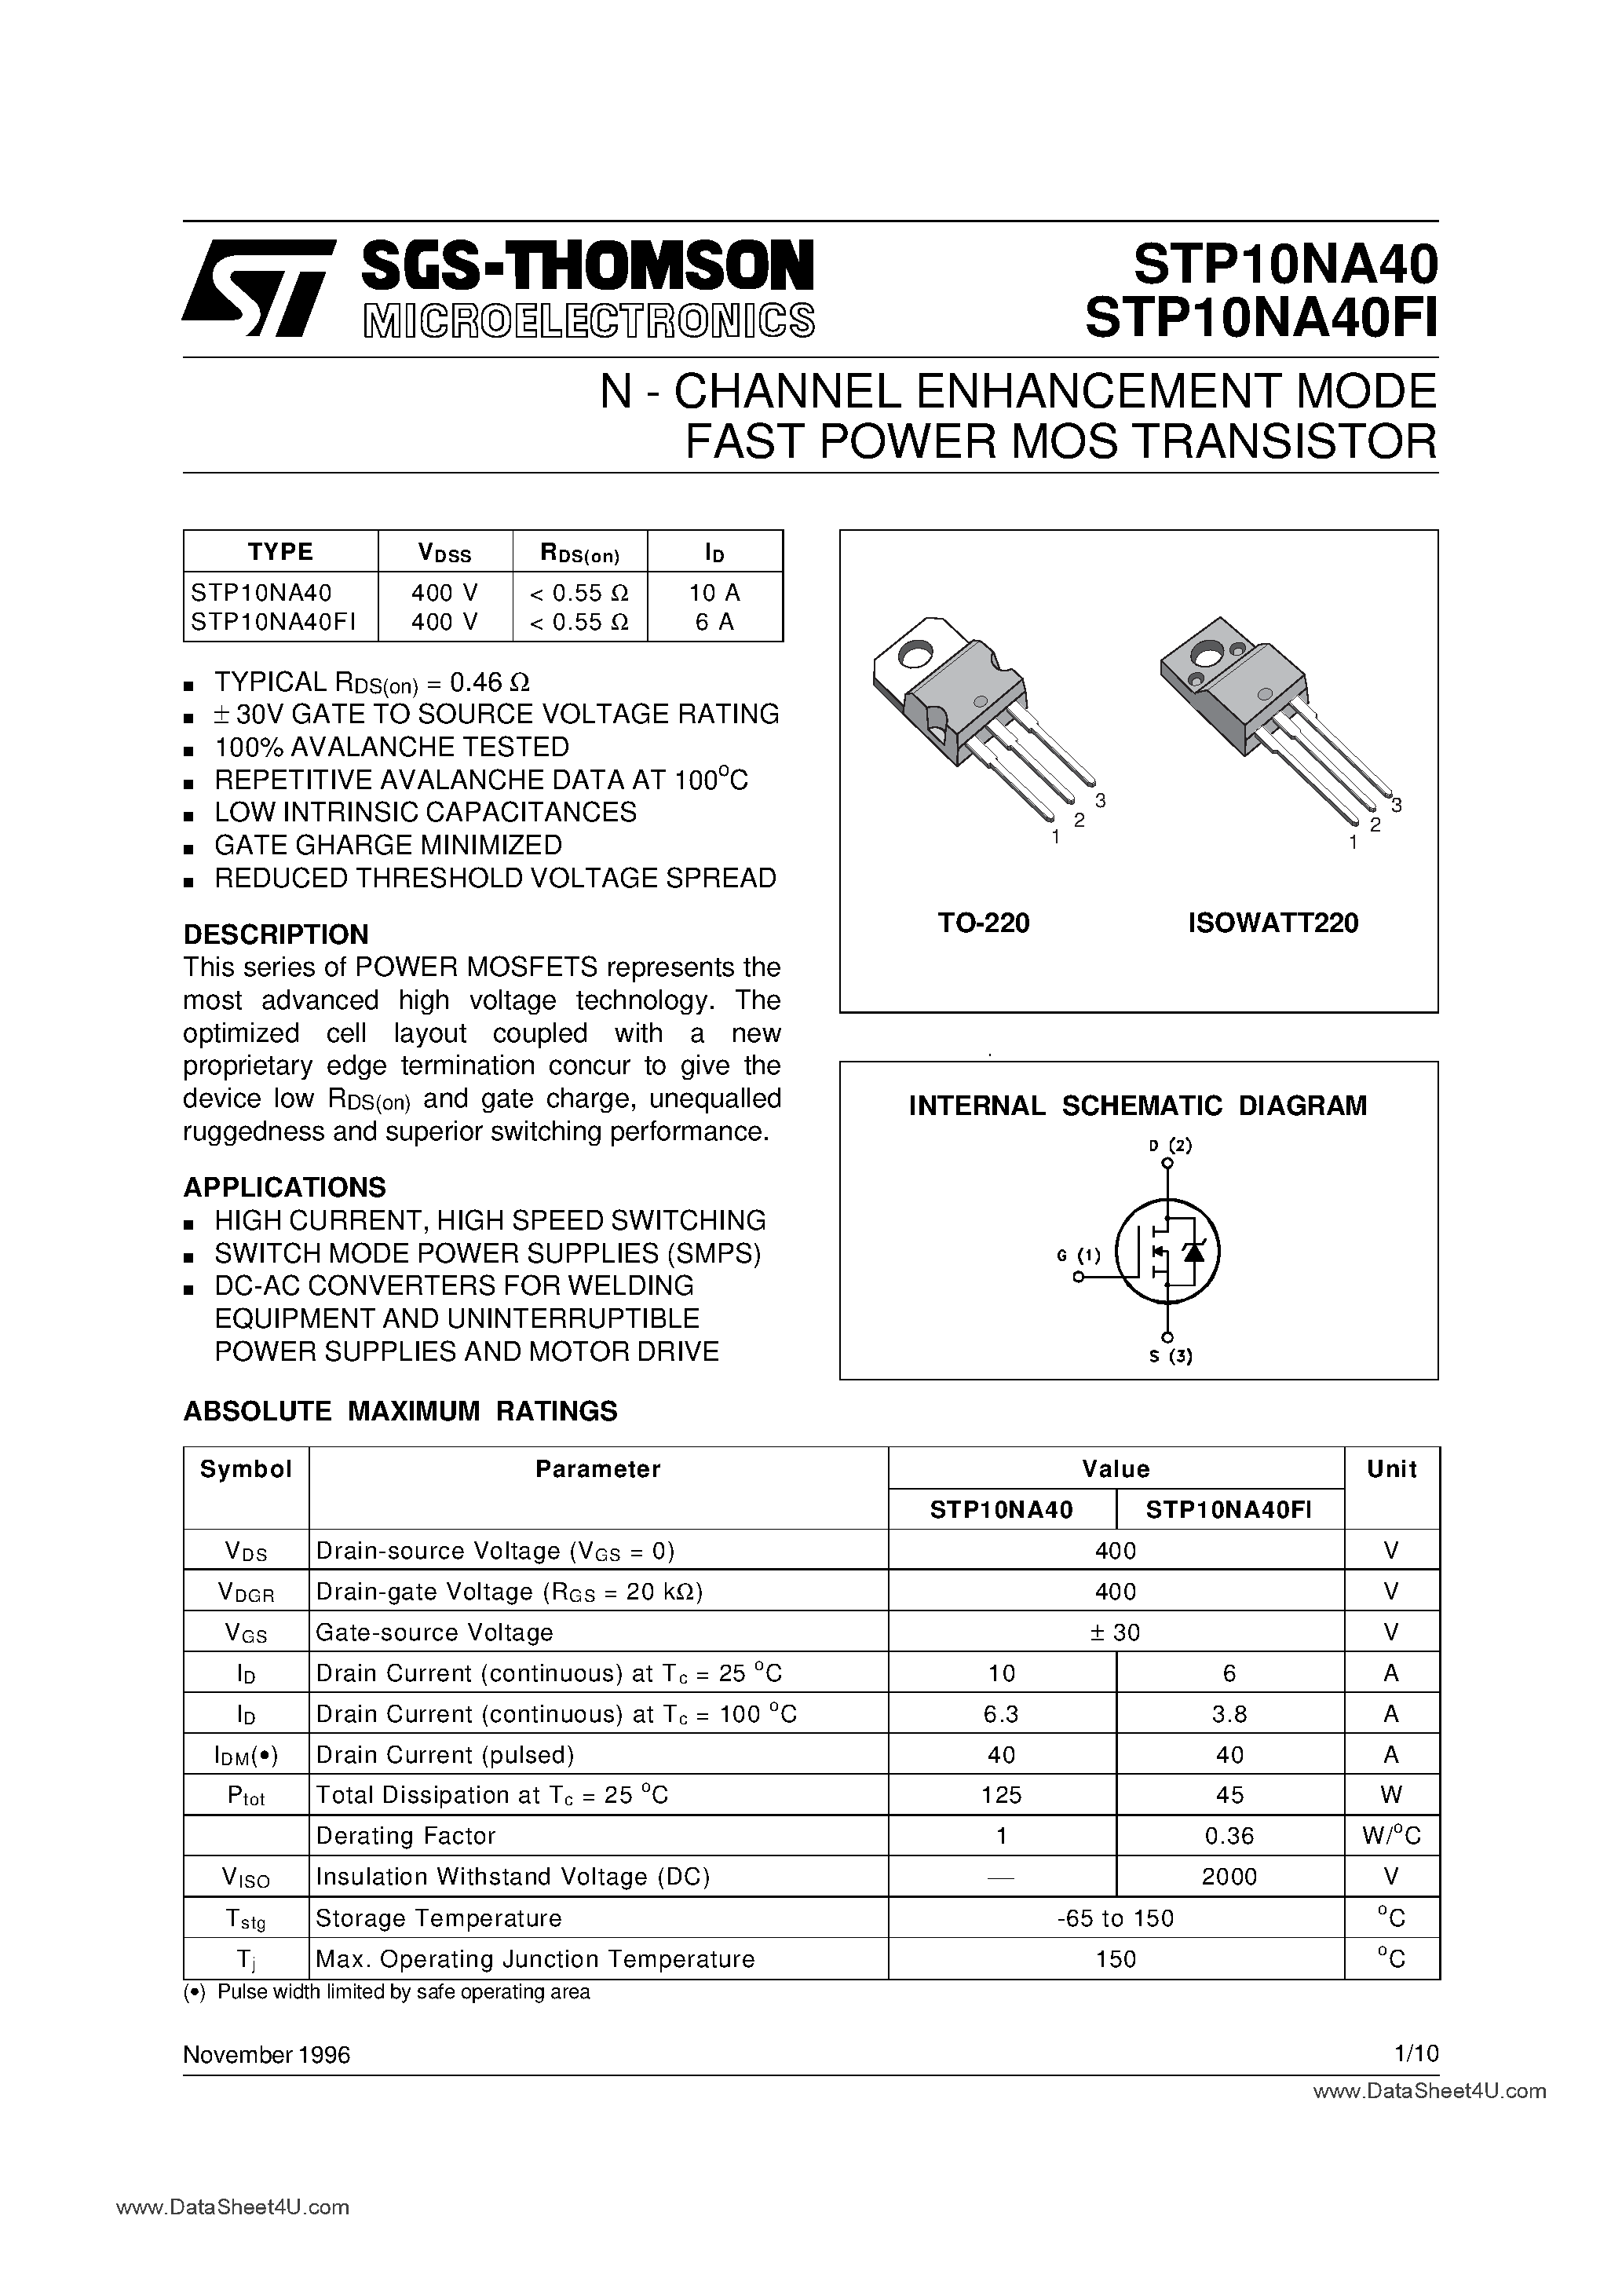 Datasheet STP10NA40 - N - CHANNEL ENHANCEMENT MODE FAST POWER MOS TRANSISTOR page 1